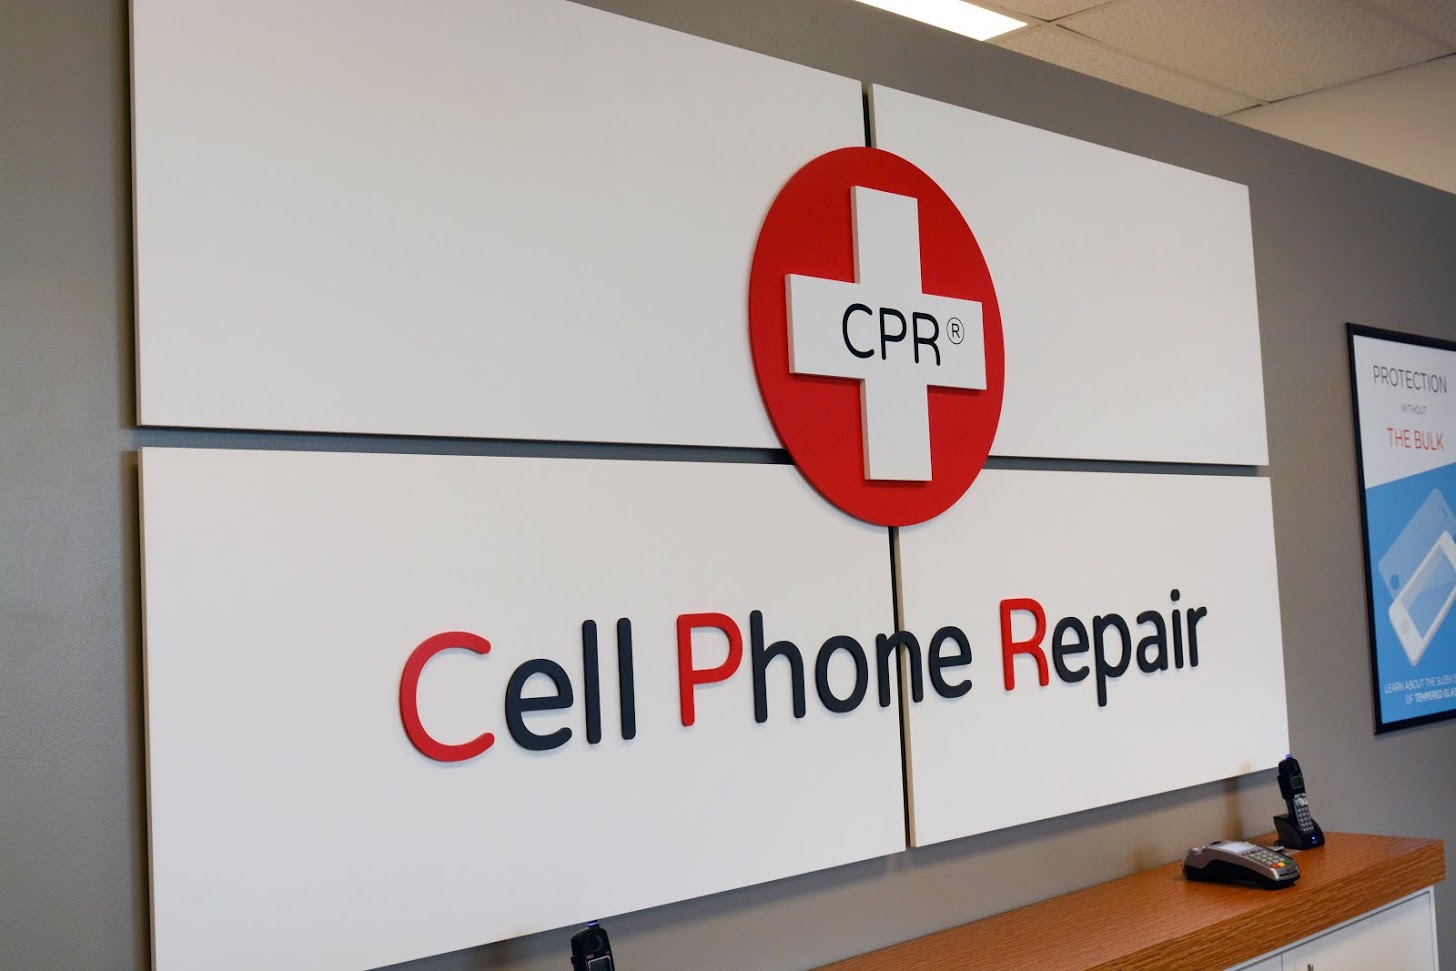 CPR Cell Phone Repair, Friday, August 16, 2019, Press release picture